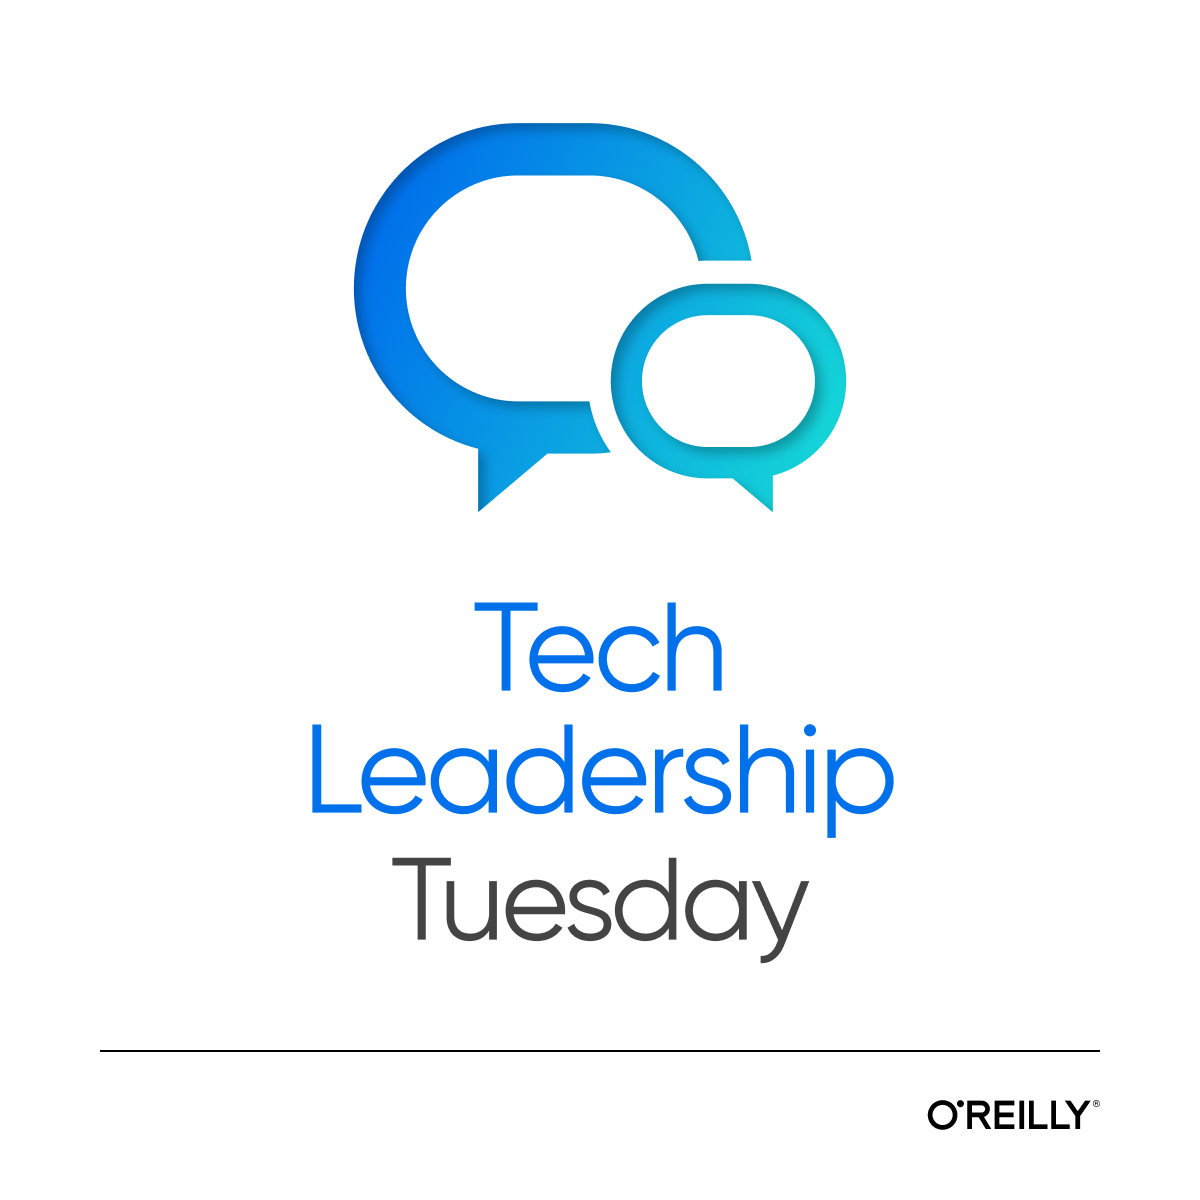 Tech Leadership Tuesday with Michael Lopp: Pursuing Your Tech Leadership Career Track with Cate Huston